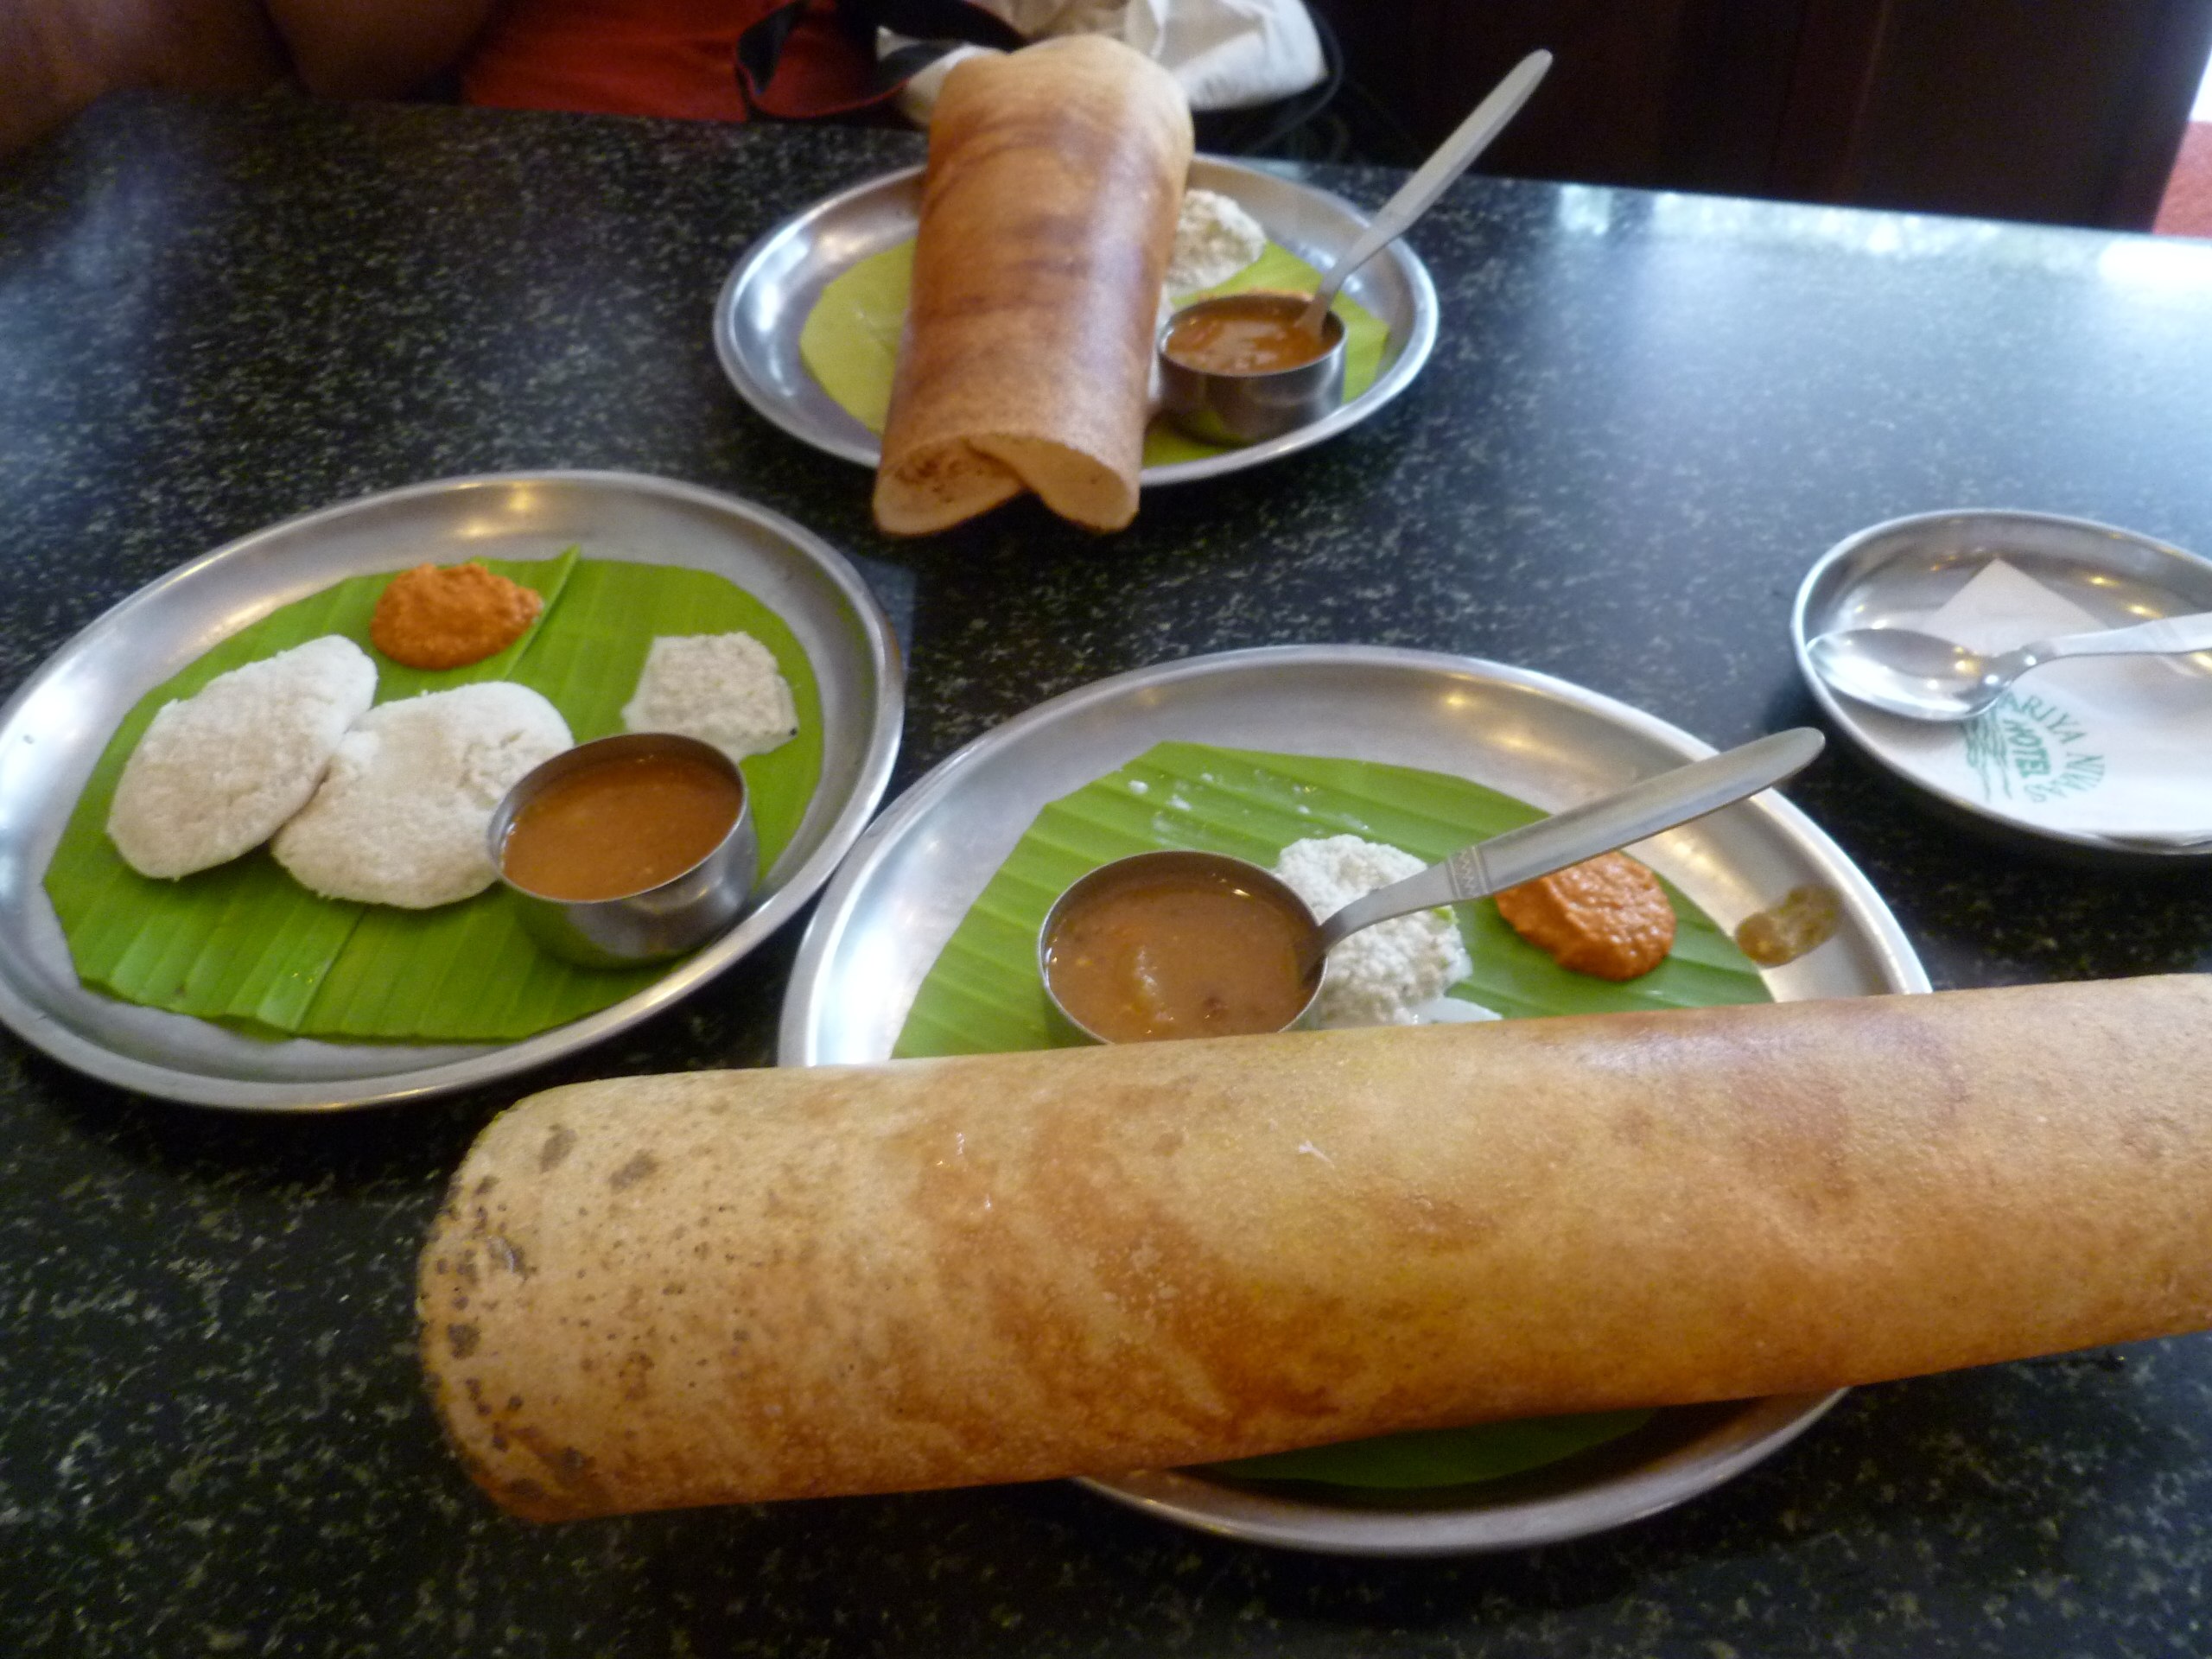 Breakfast places in Bangalore near me